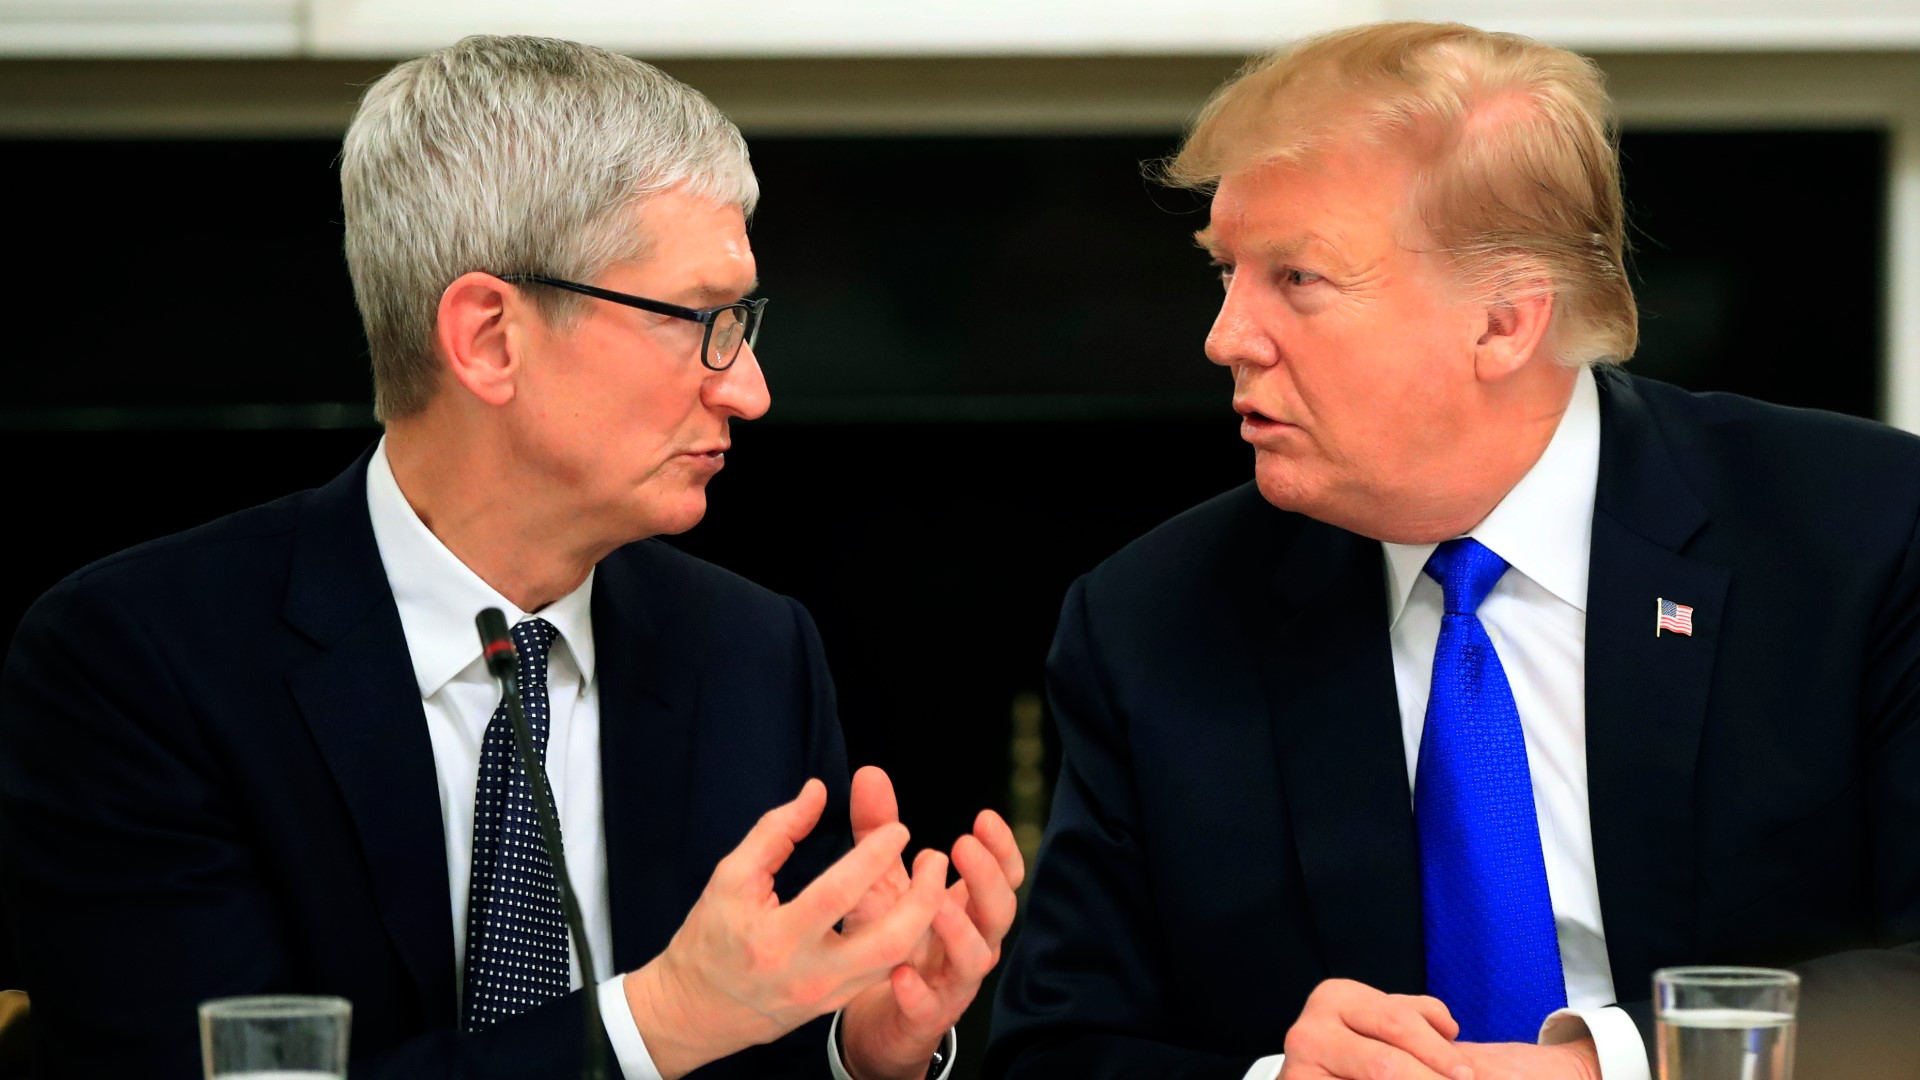 Sitting next to Apple CEO Tim Cook, President Donald Trump slipped and called him "Tim Apple."